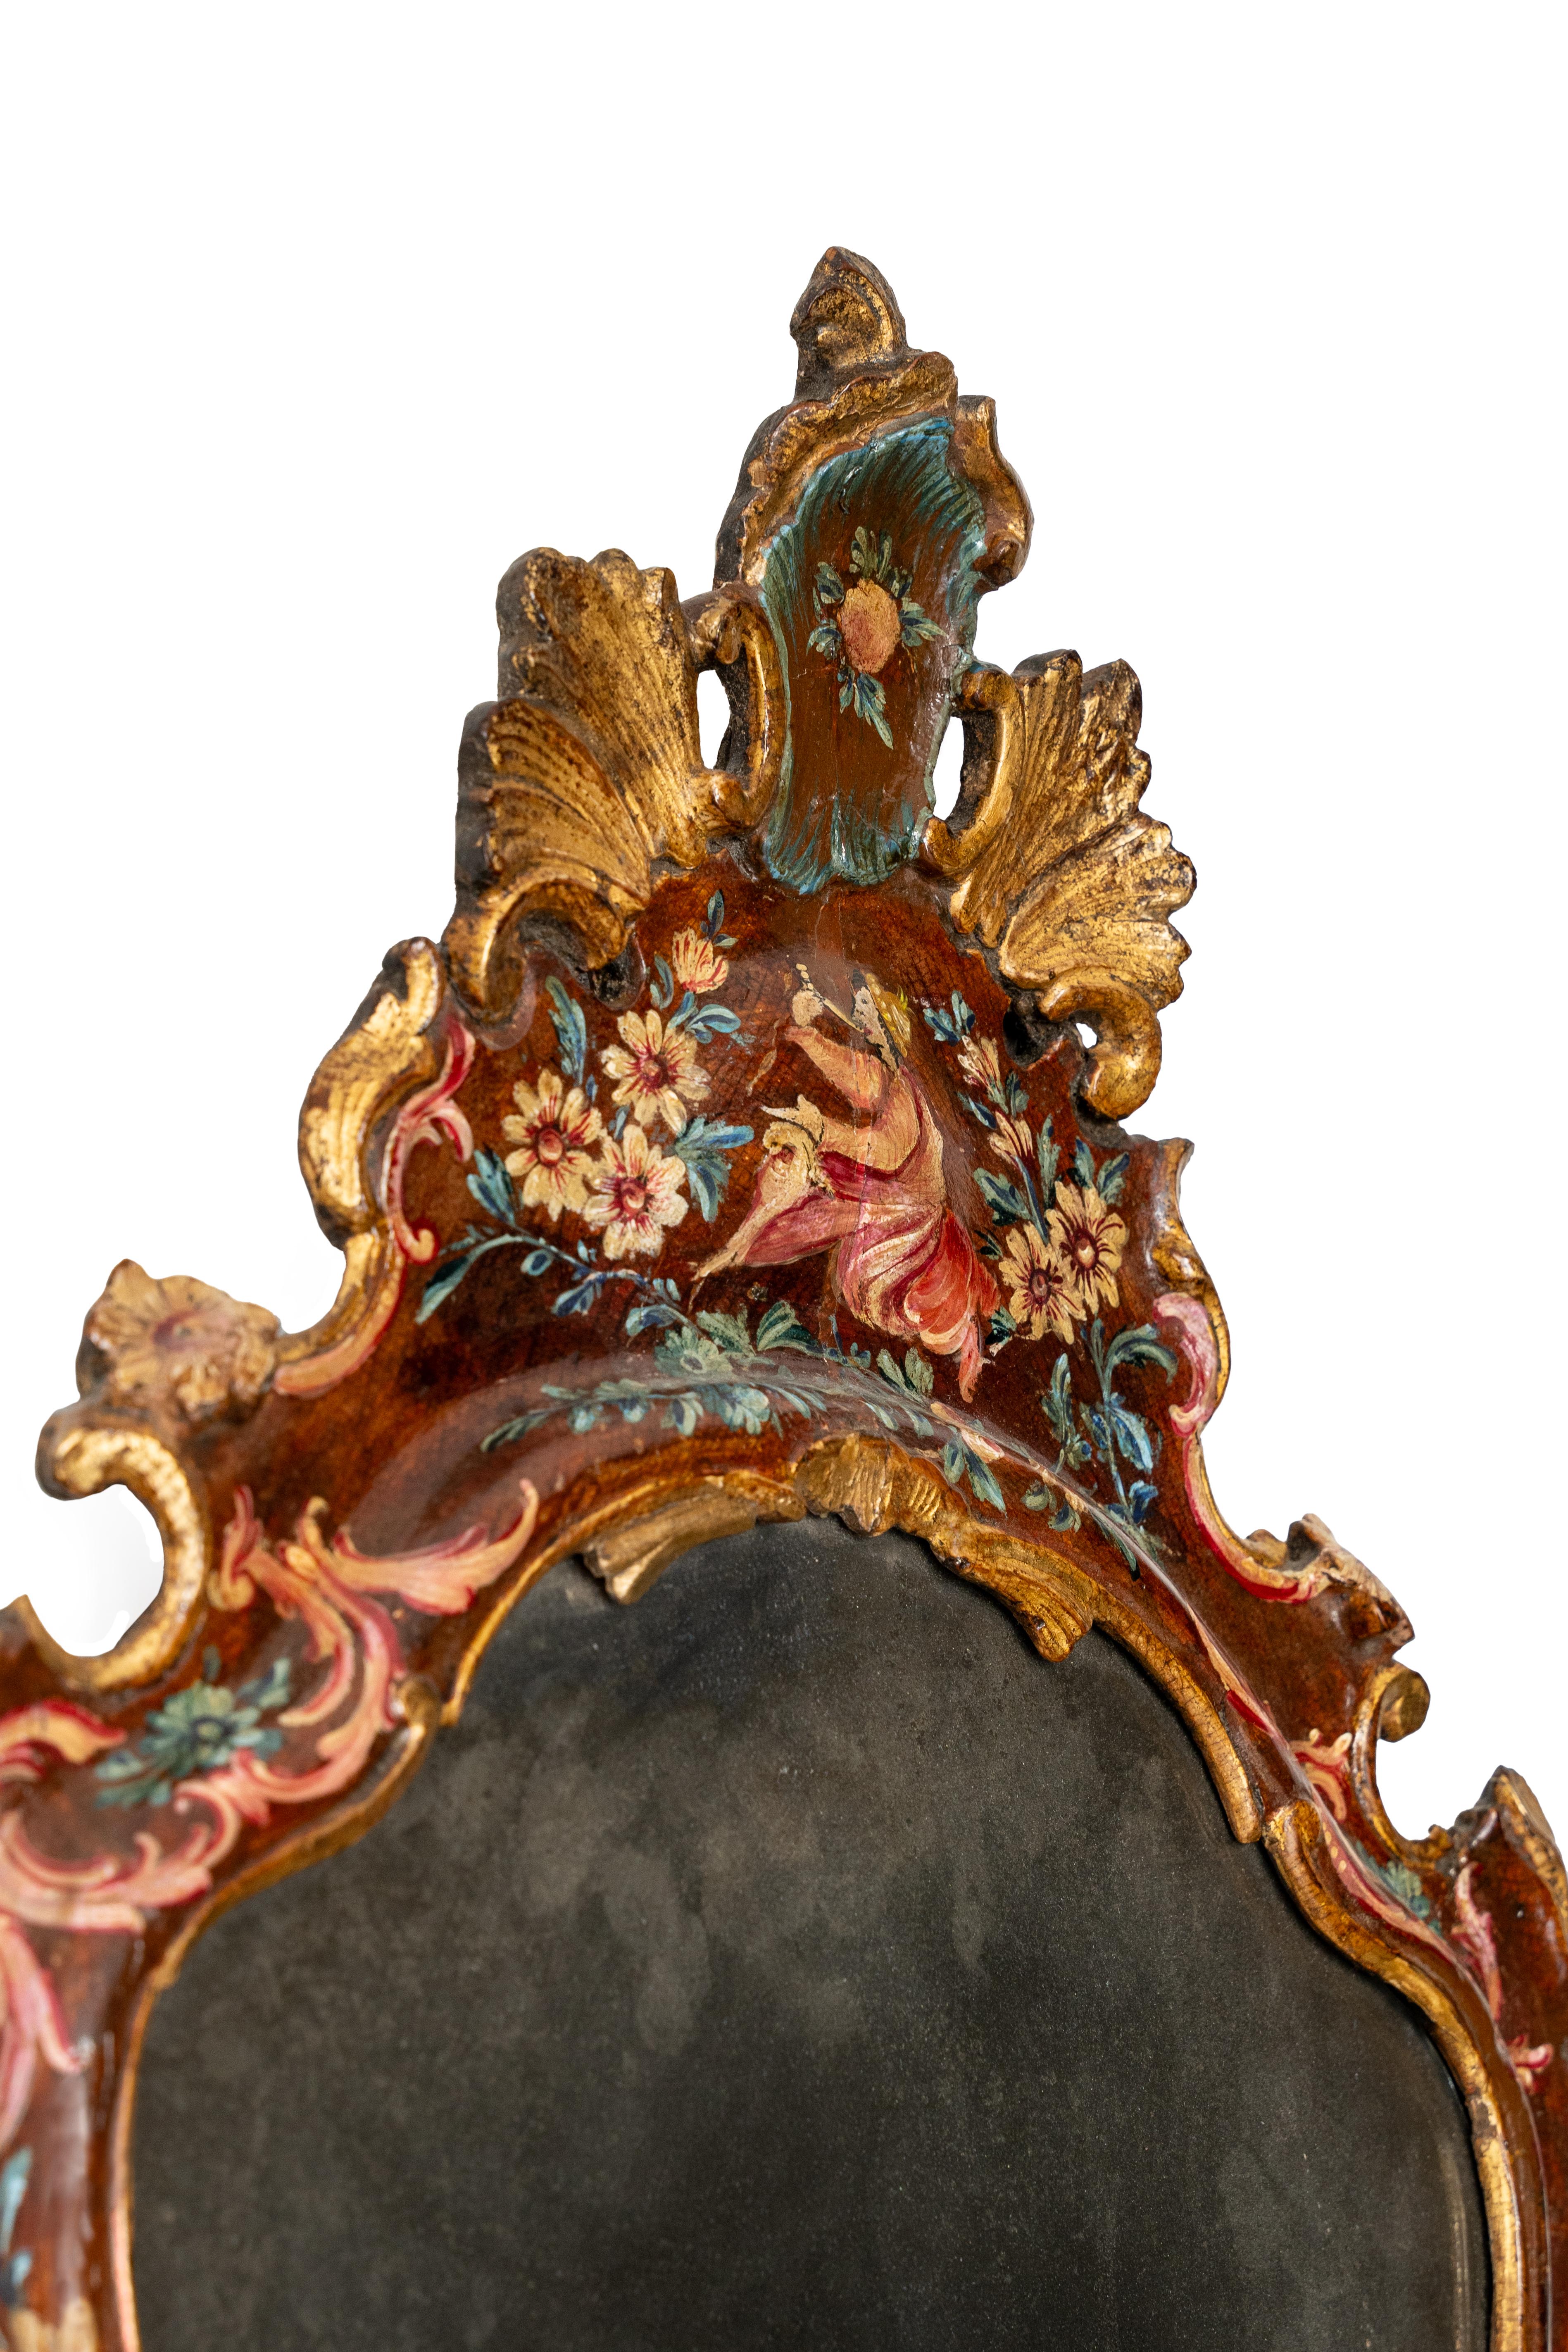 Rare Venetian mirror in lacquered and gilded wood. Frame shaped in every part. Original and contemporary mirror from the 18th century.

Completely intact and original from the 18th century, 1750.

The 